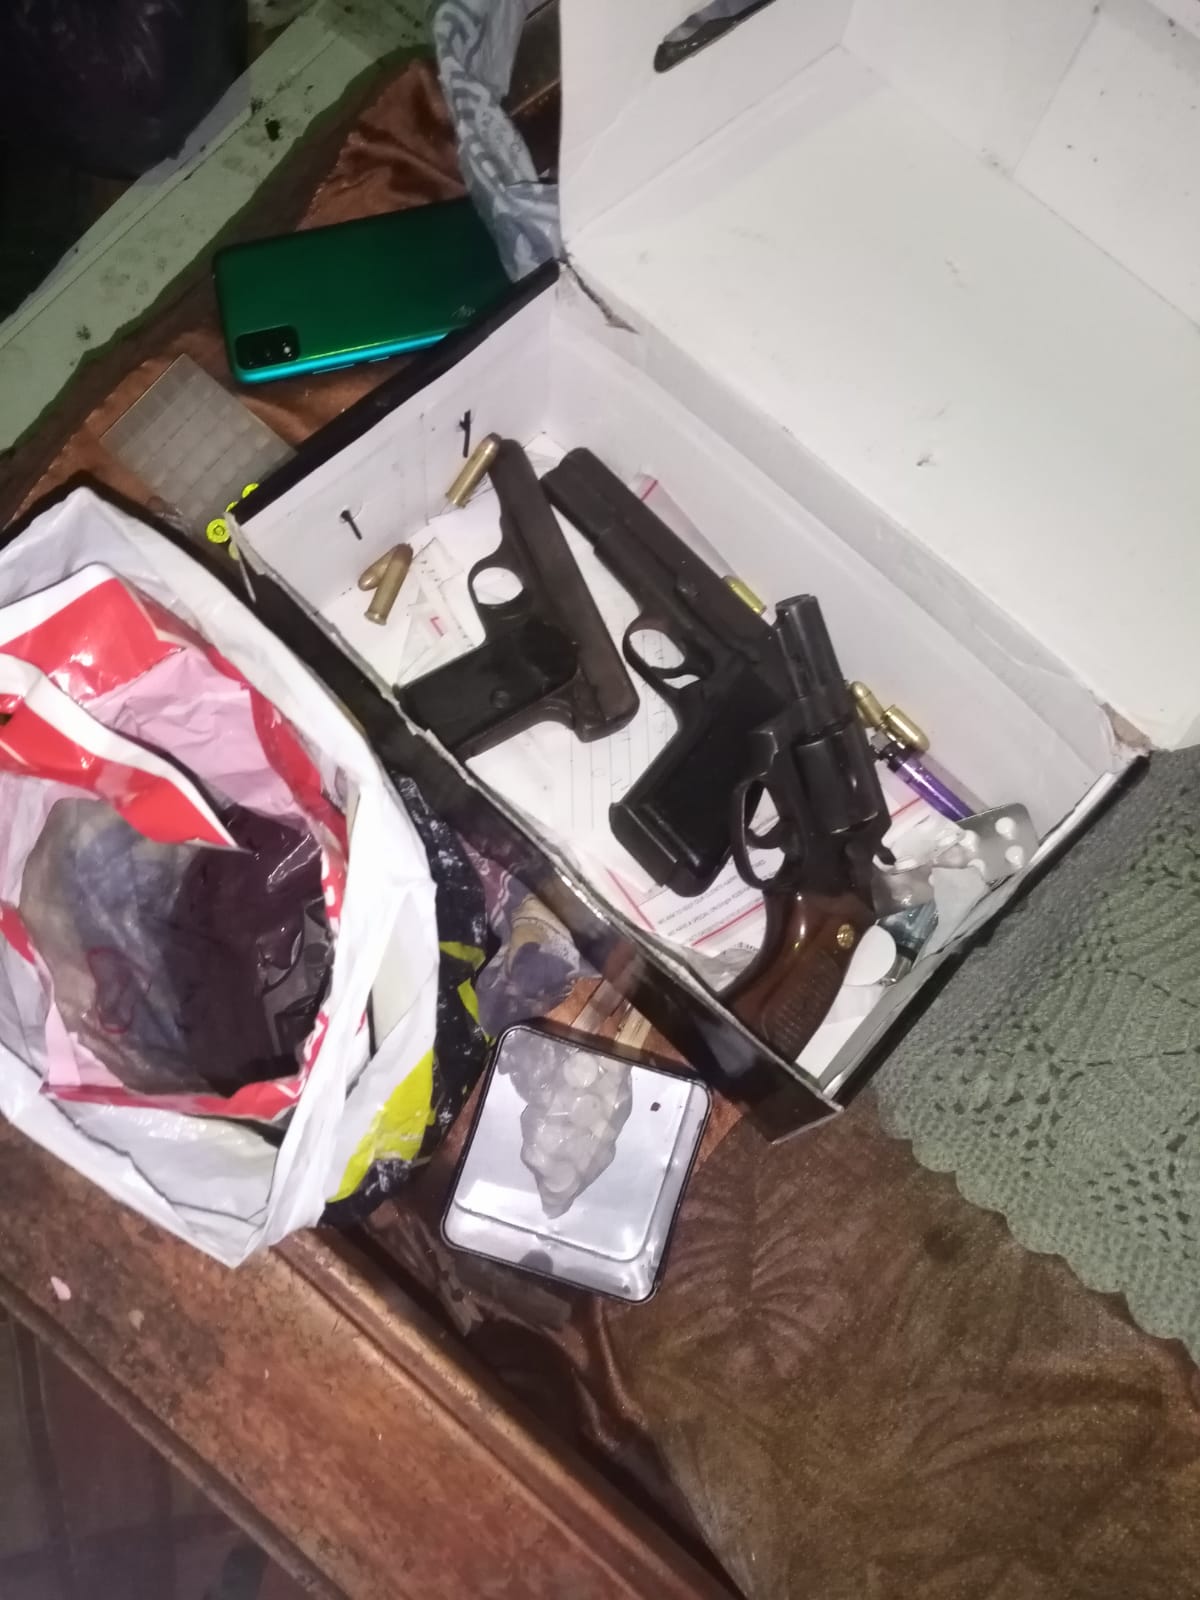 Nelson Mandela Bay police track down wanted suspect, recover guns and drugs